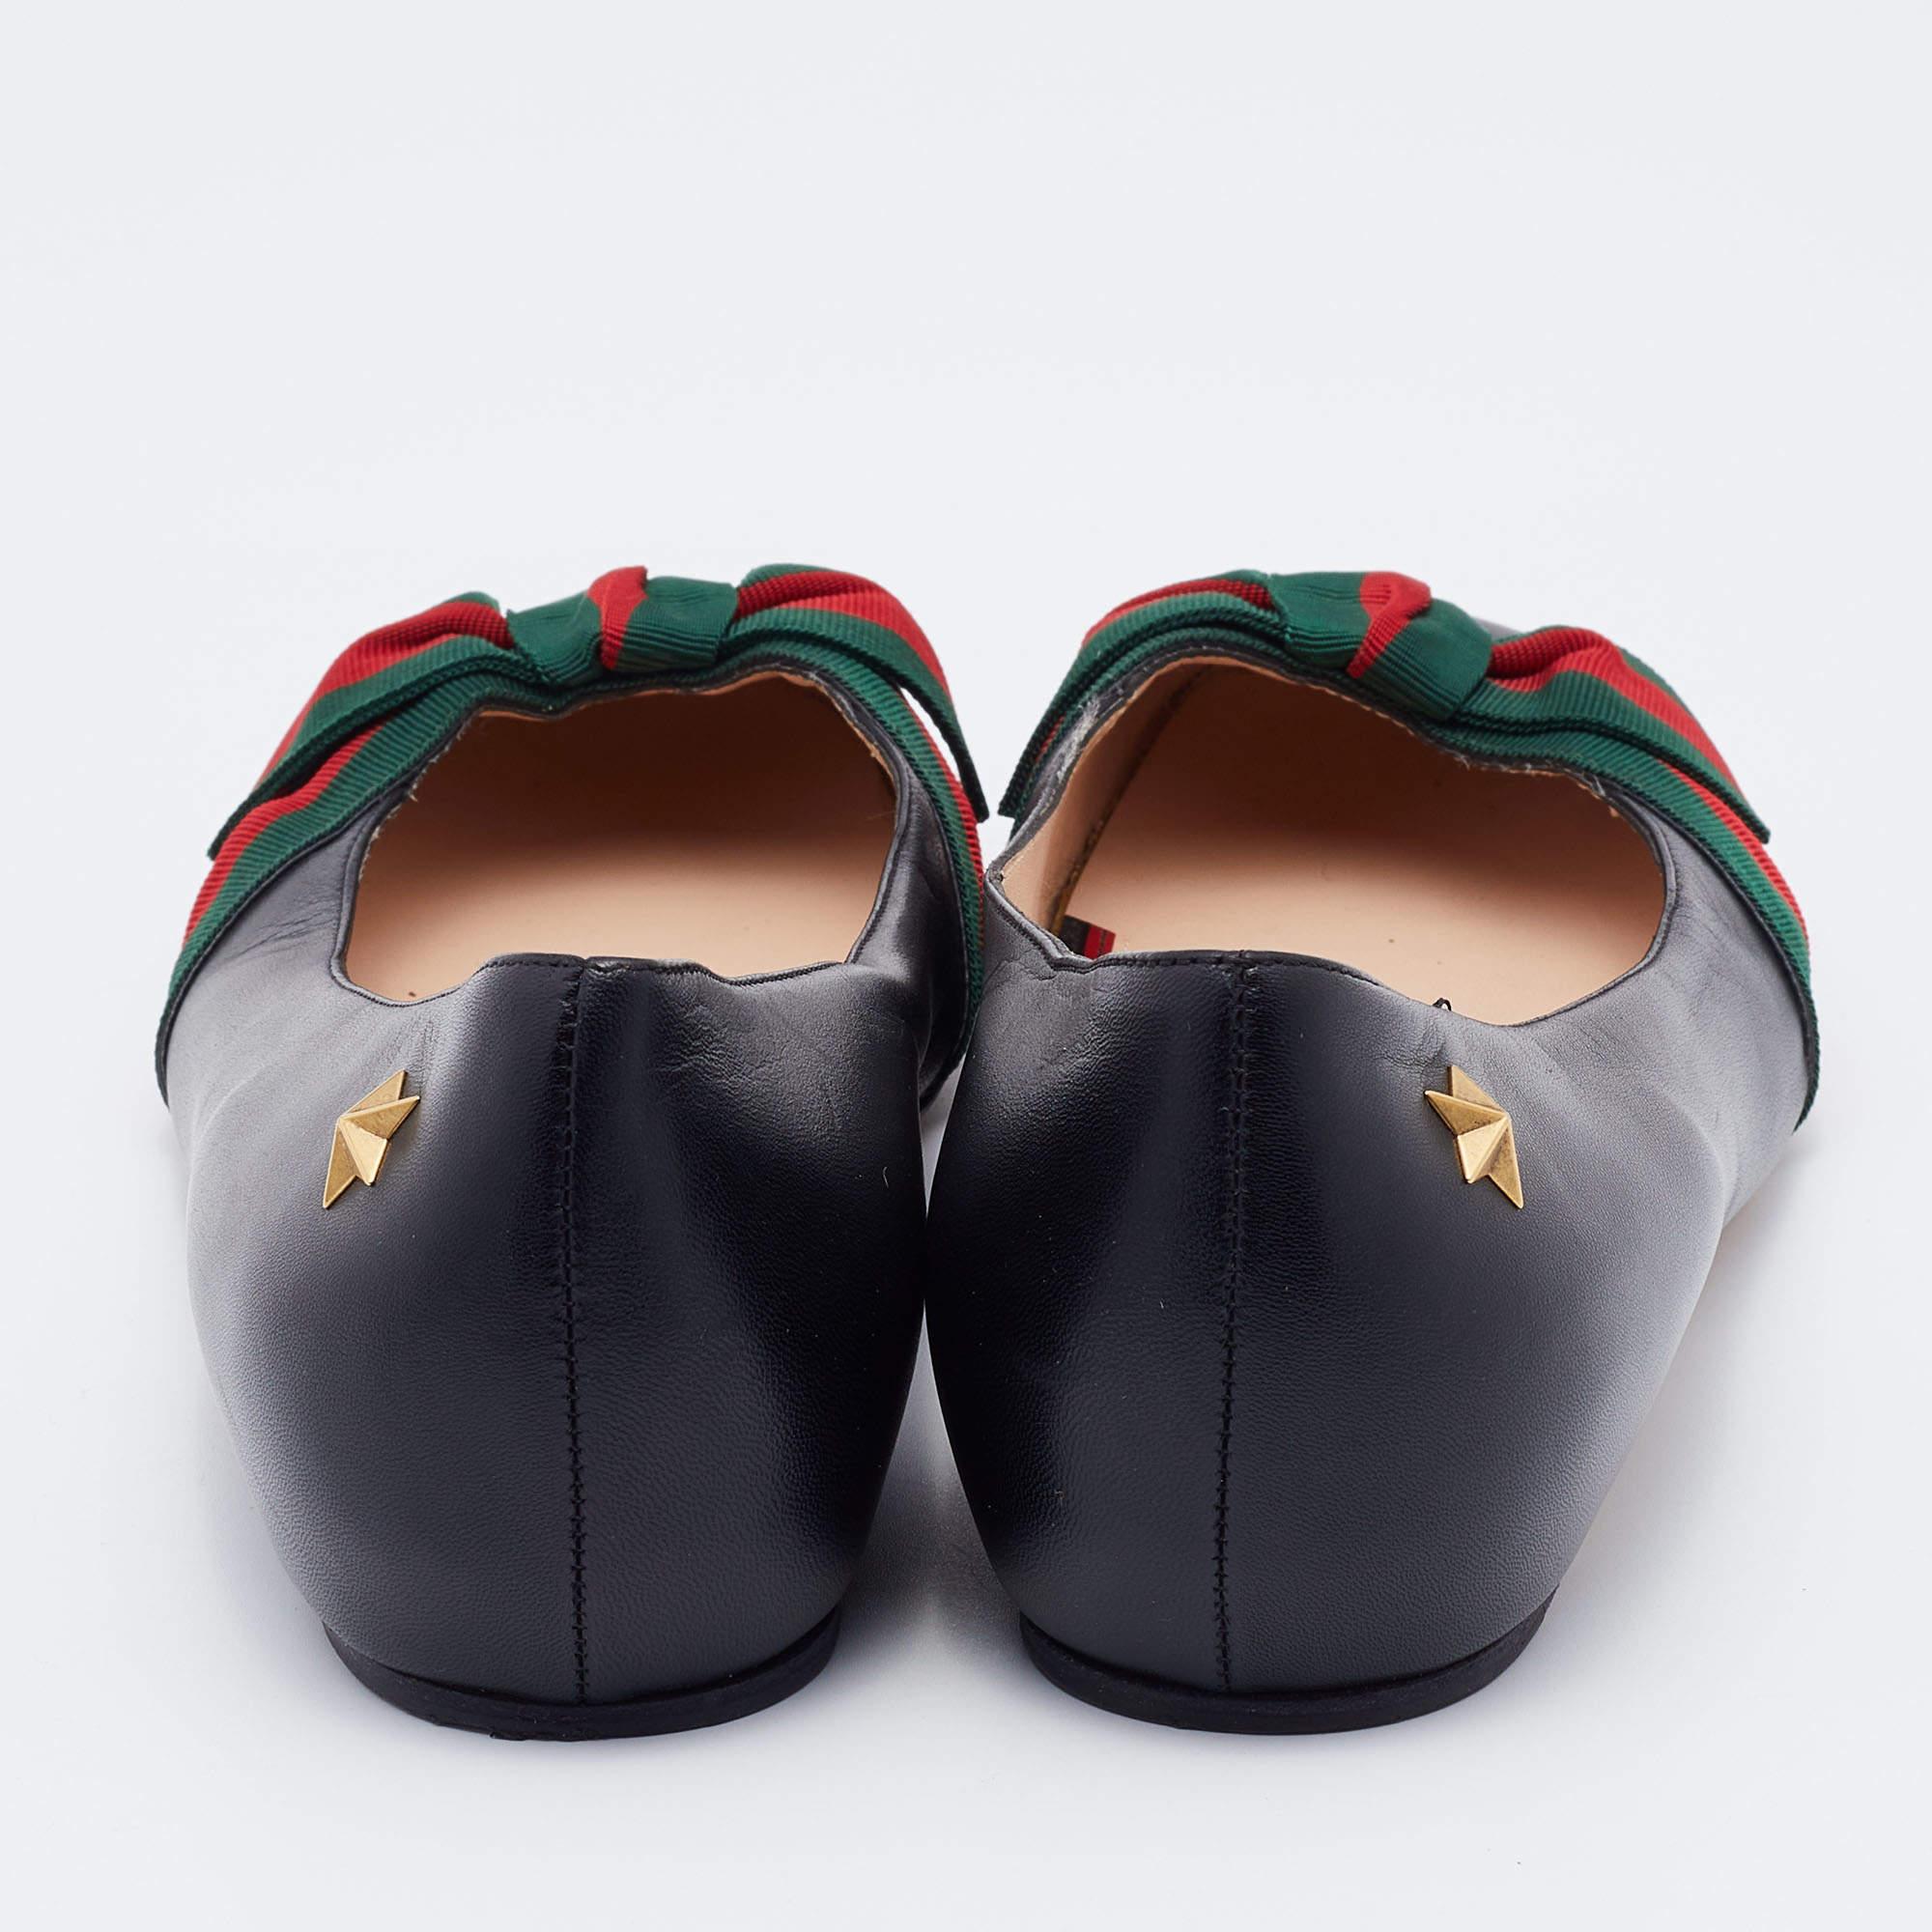 Gucci Black Leather Web Bow Ballet Flats Size 37.5 5